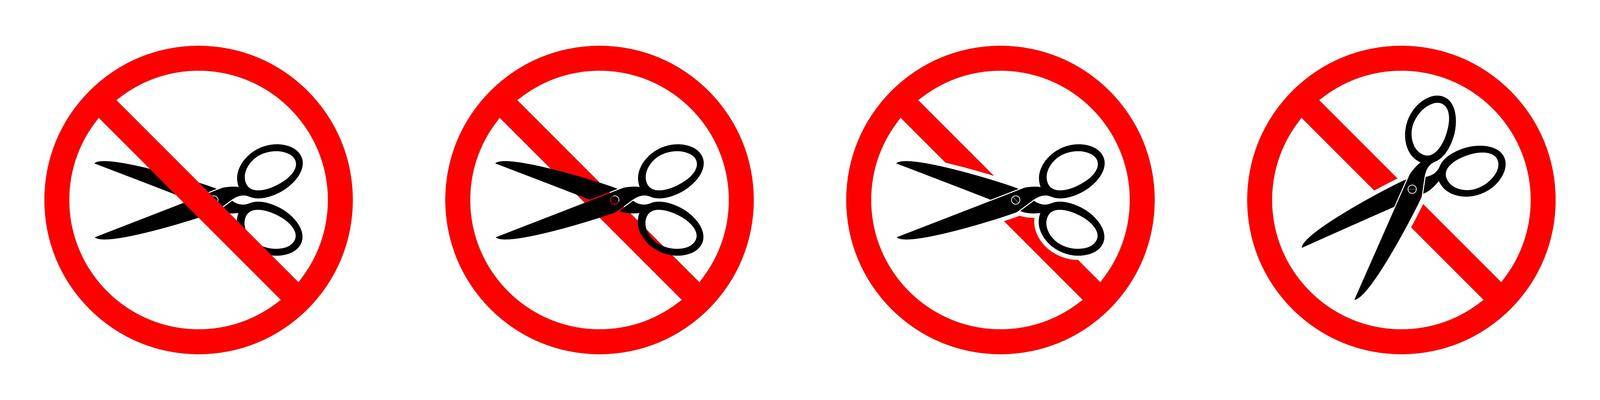 Stop or ban red round sign with scissors icon. Scissors is prohibited by Chekman